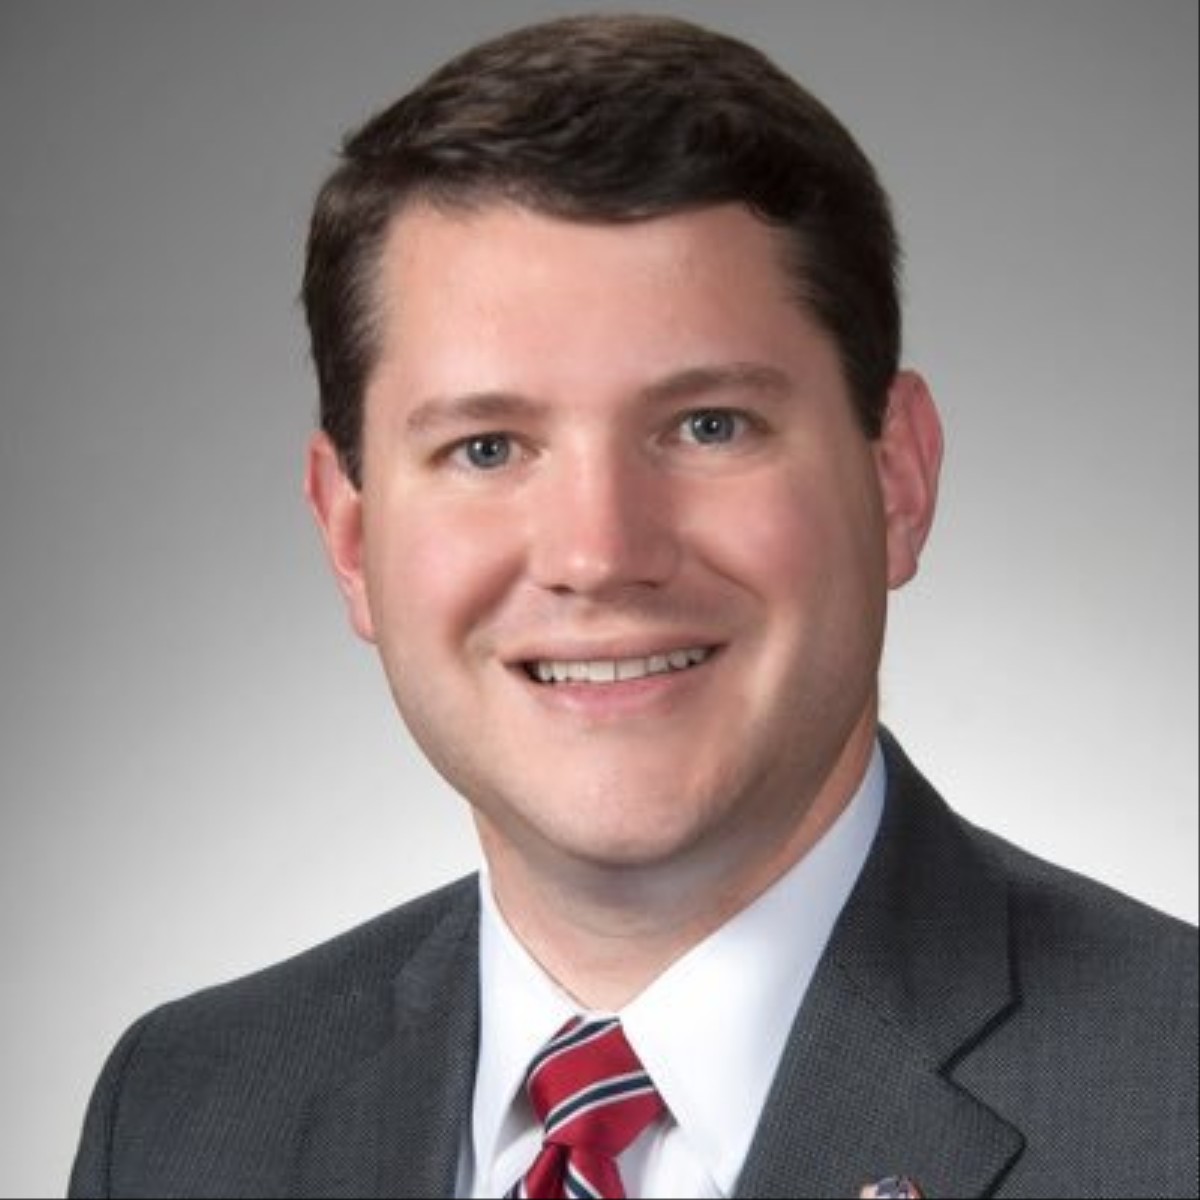 Anti Gay Ohio Lawmaker Caught Having Gay Sex Now Facing 30 More Accusations Vice 0678